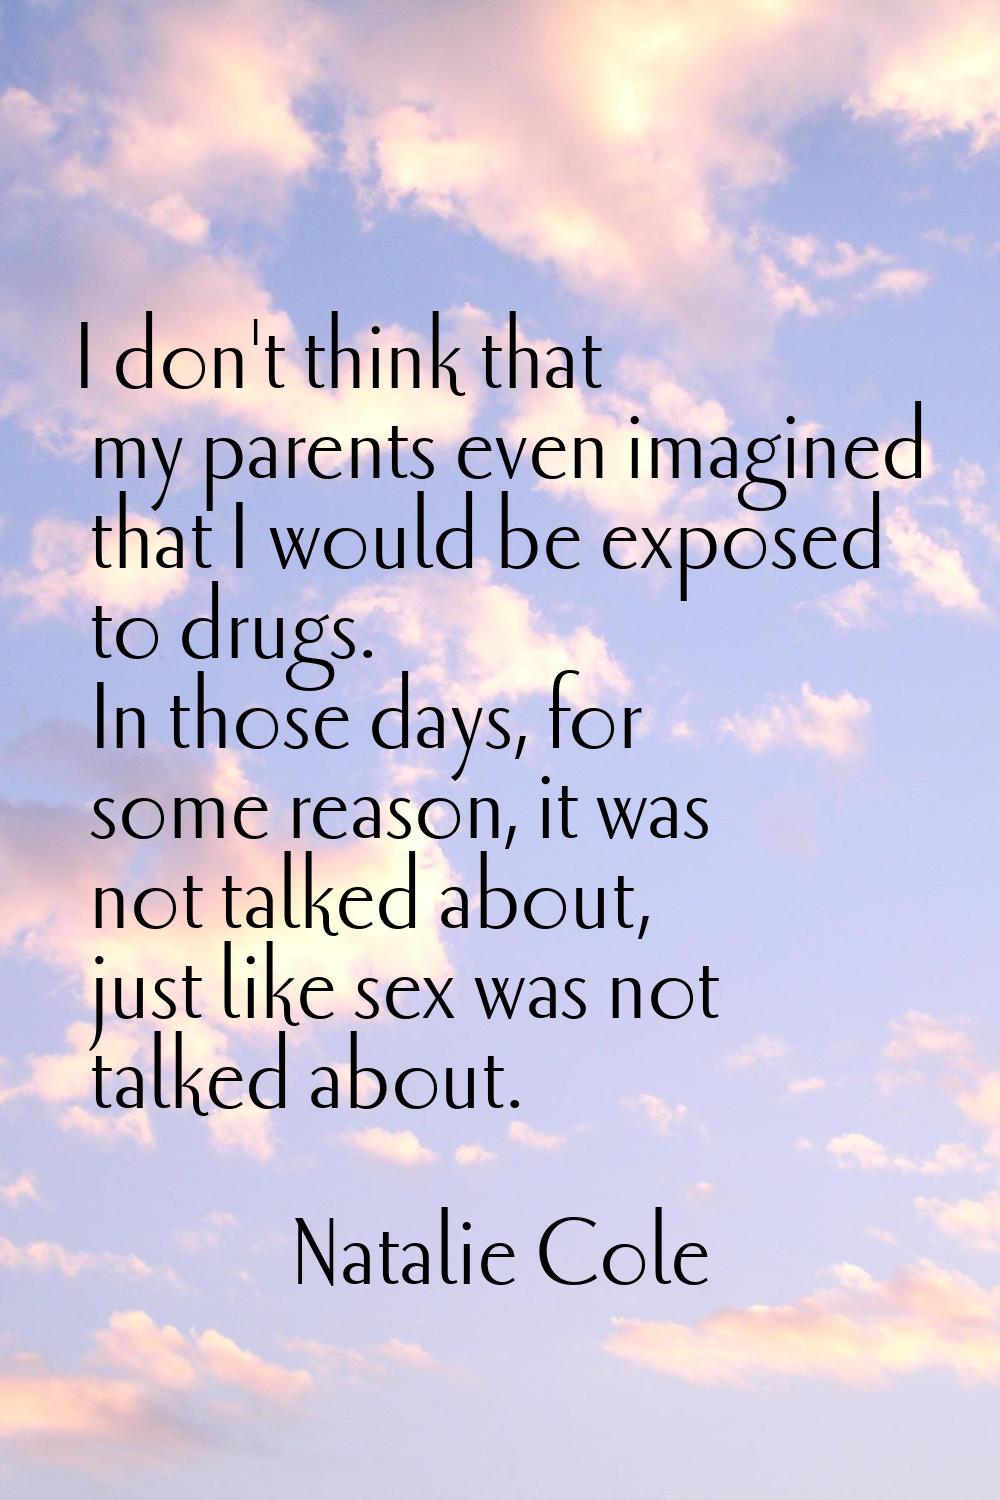 I don't think that my parents even imagined that I would be exposed to drugs. In those days, for so